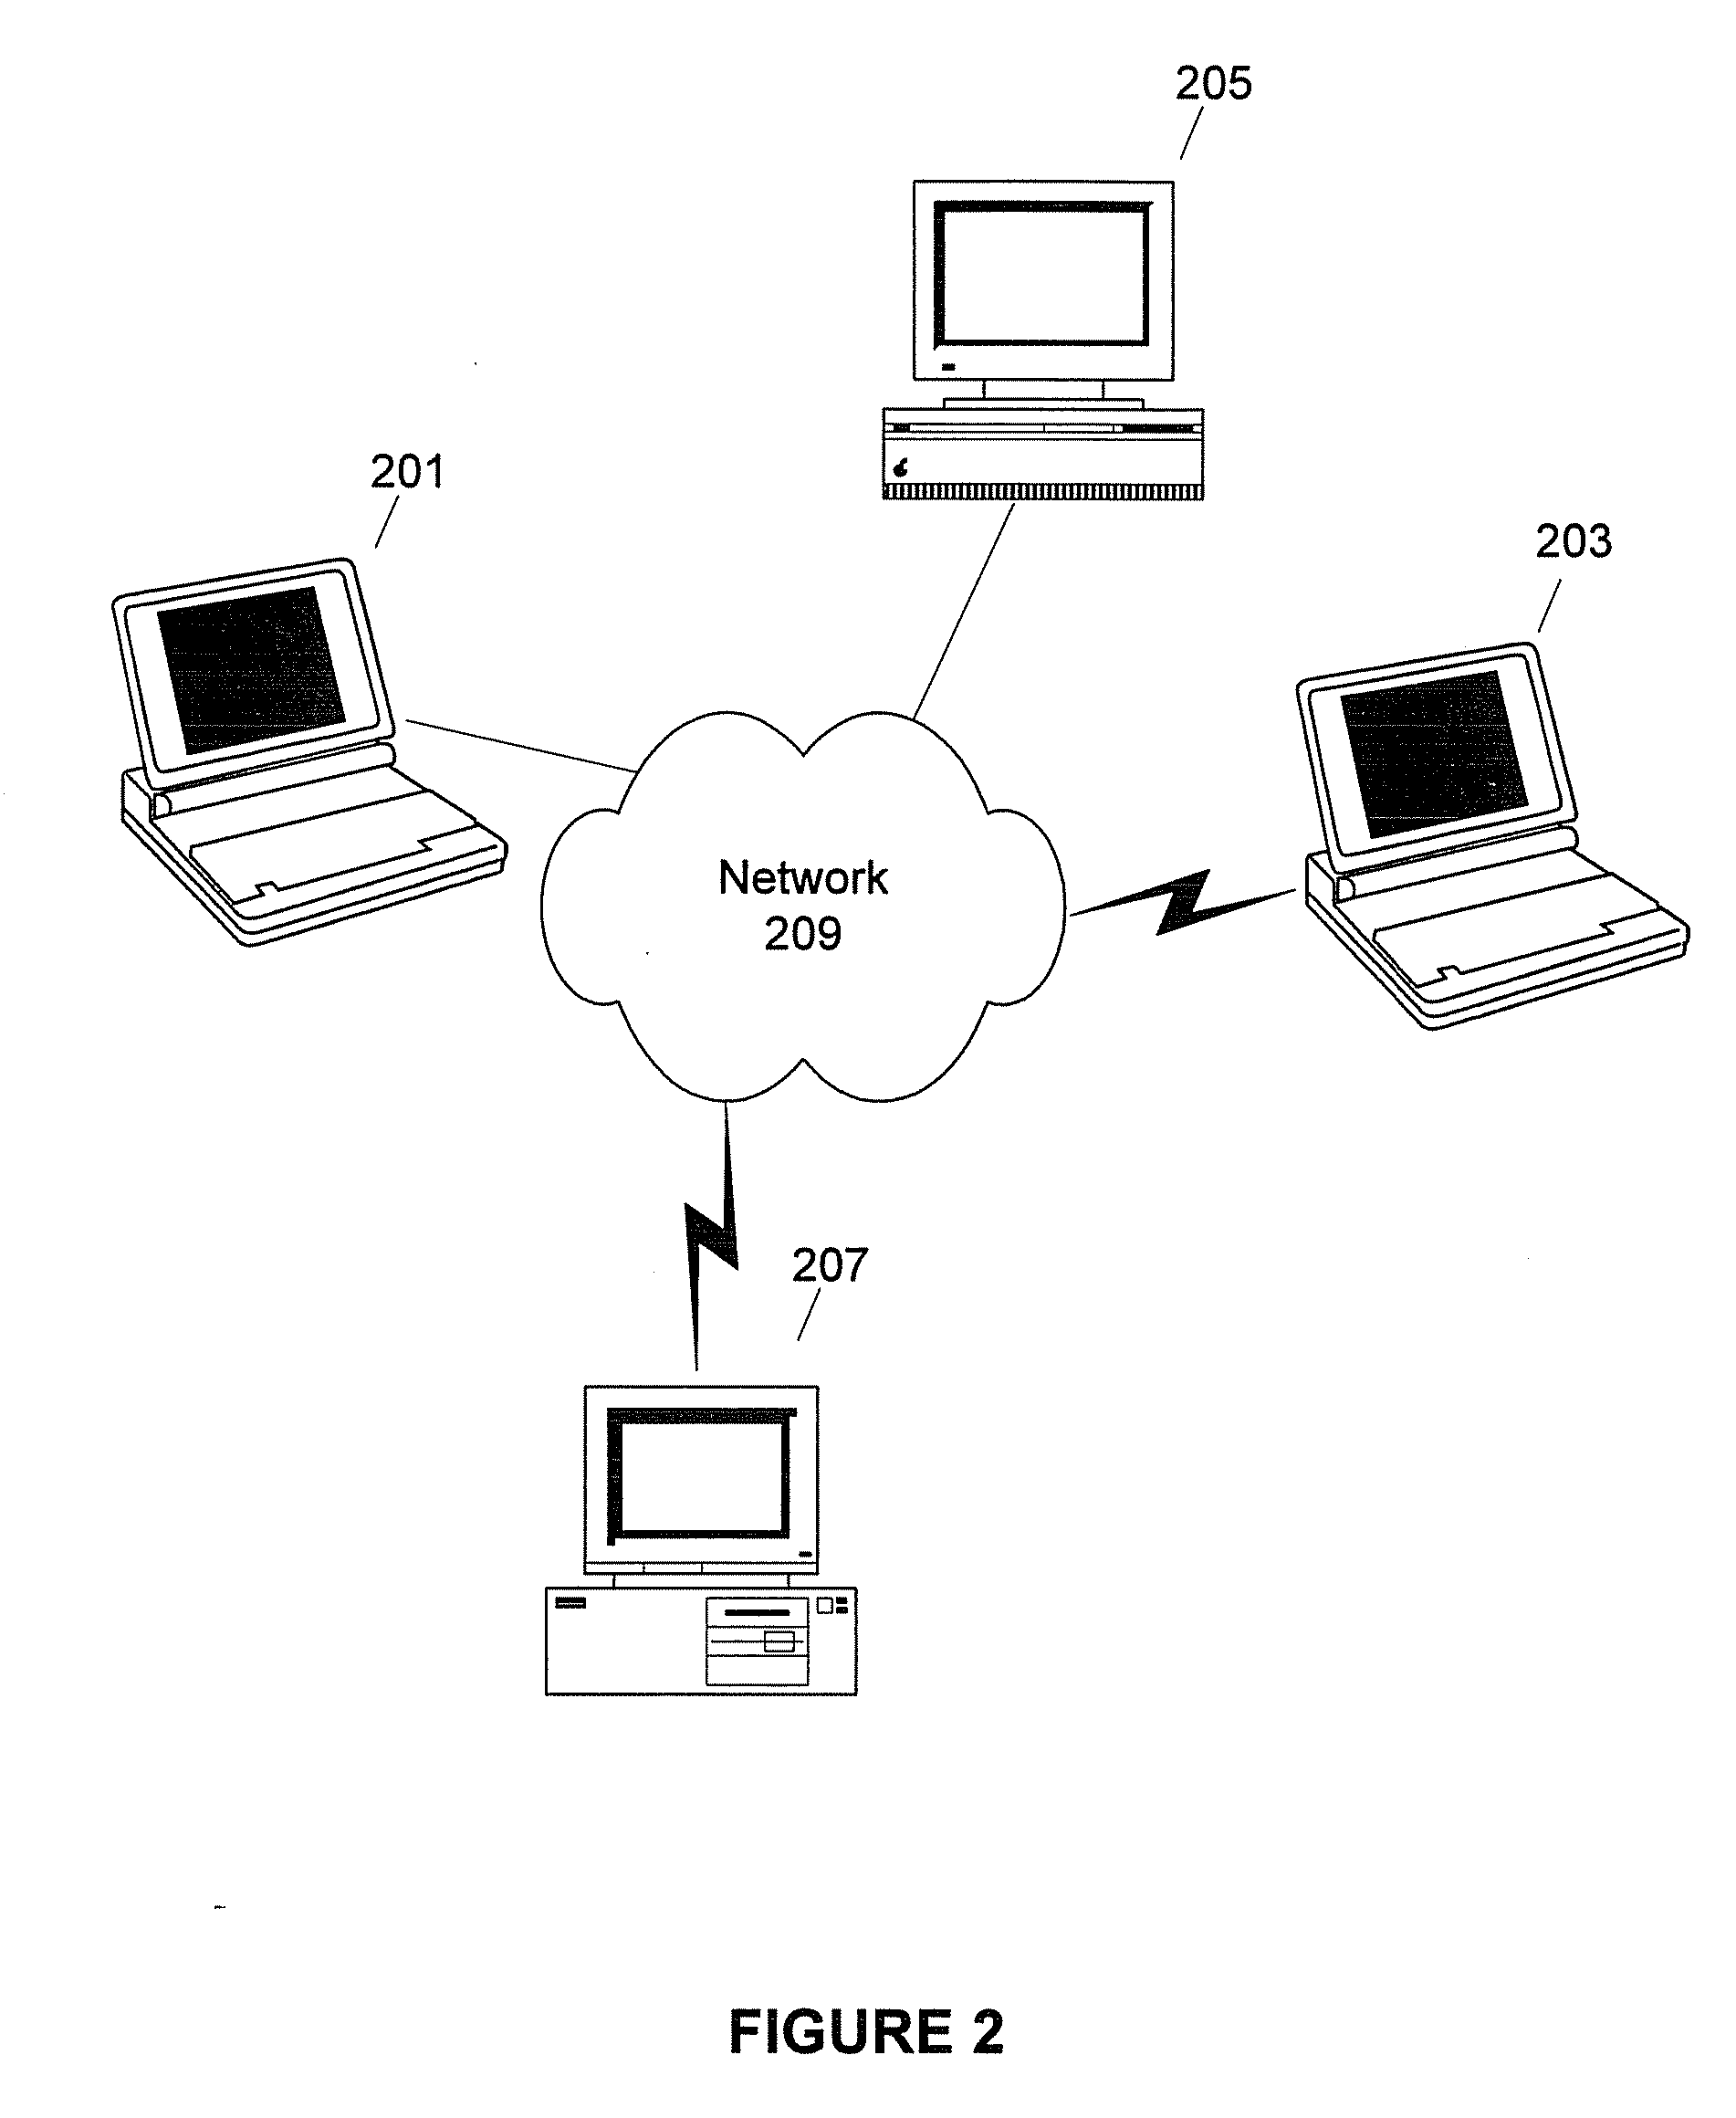 Intergrated experience of vogue system and method for shared intergrated online social interaction